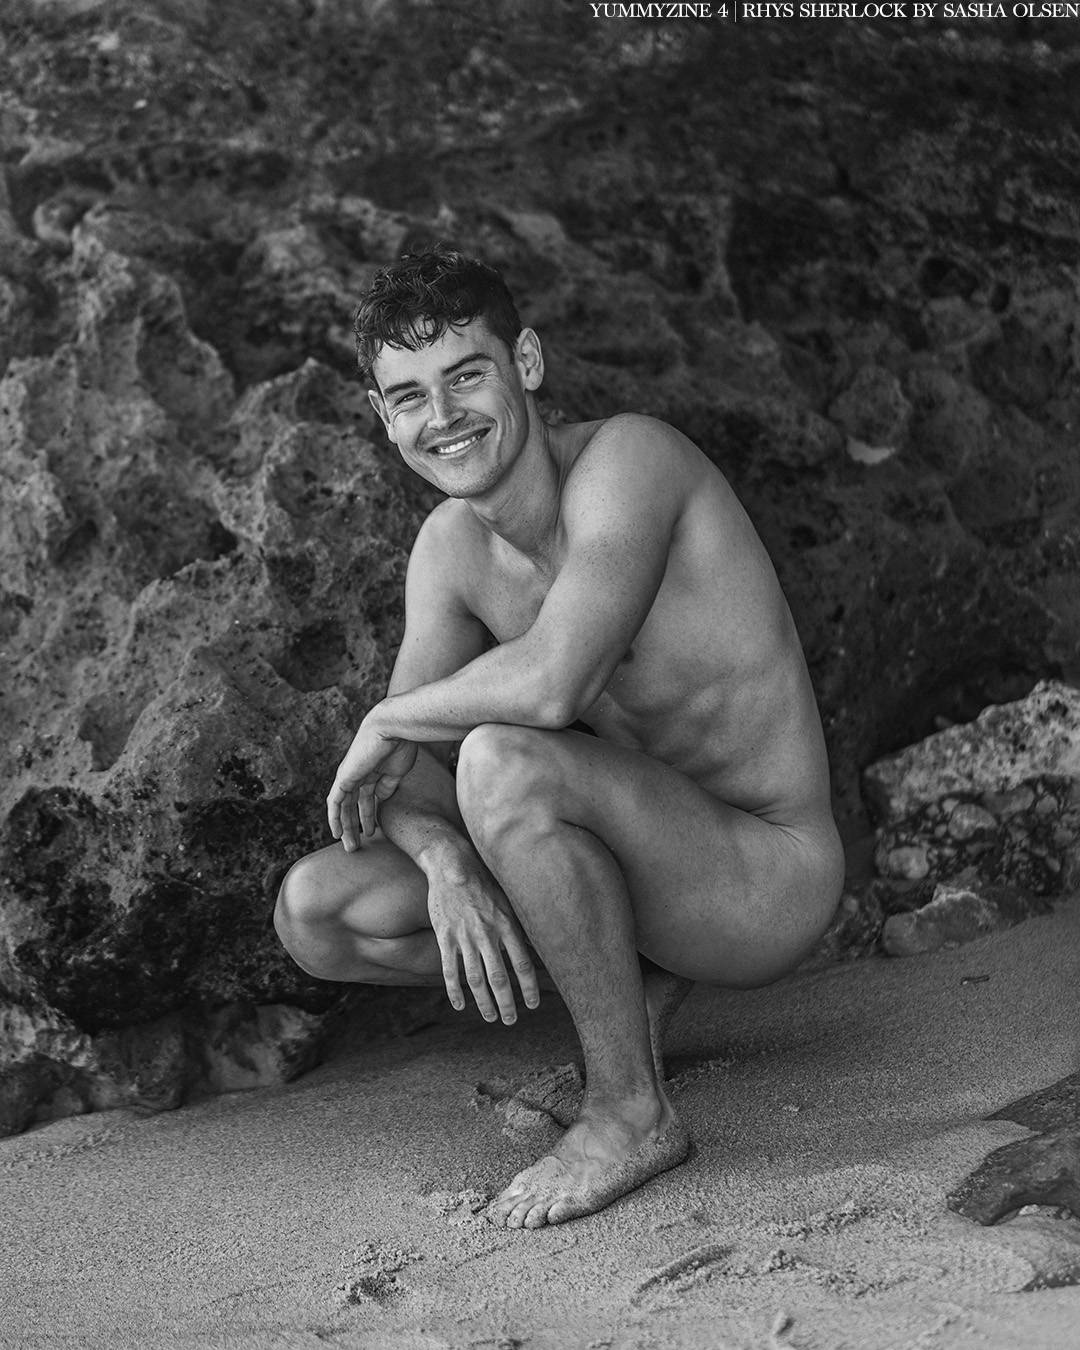 Rhys Sherlock, aspiring model and actor, freshens off for the lens of Sasha Olsen. Sitting down with Yummy, Rhys sheds light on the intricate balance between personal growth, pursuing dreams, and the ever-present world of social media. Opening up about his pleasure and his journey, the young model bares all. 